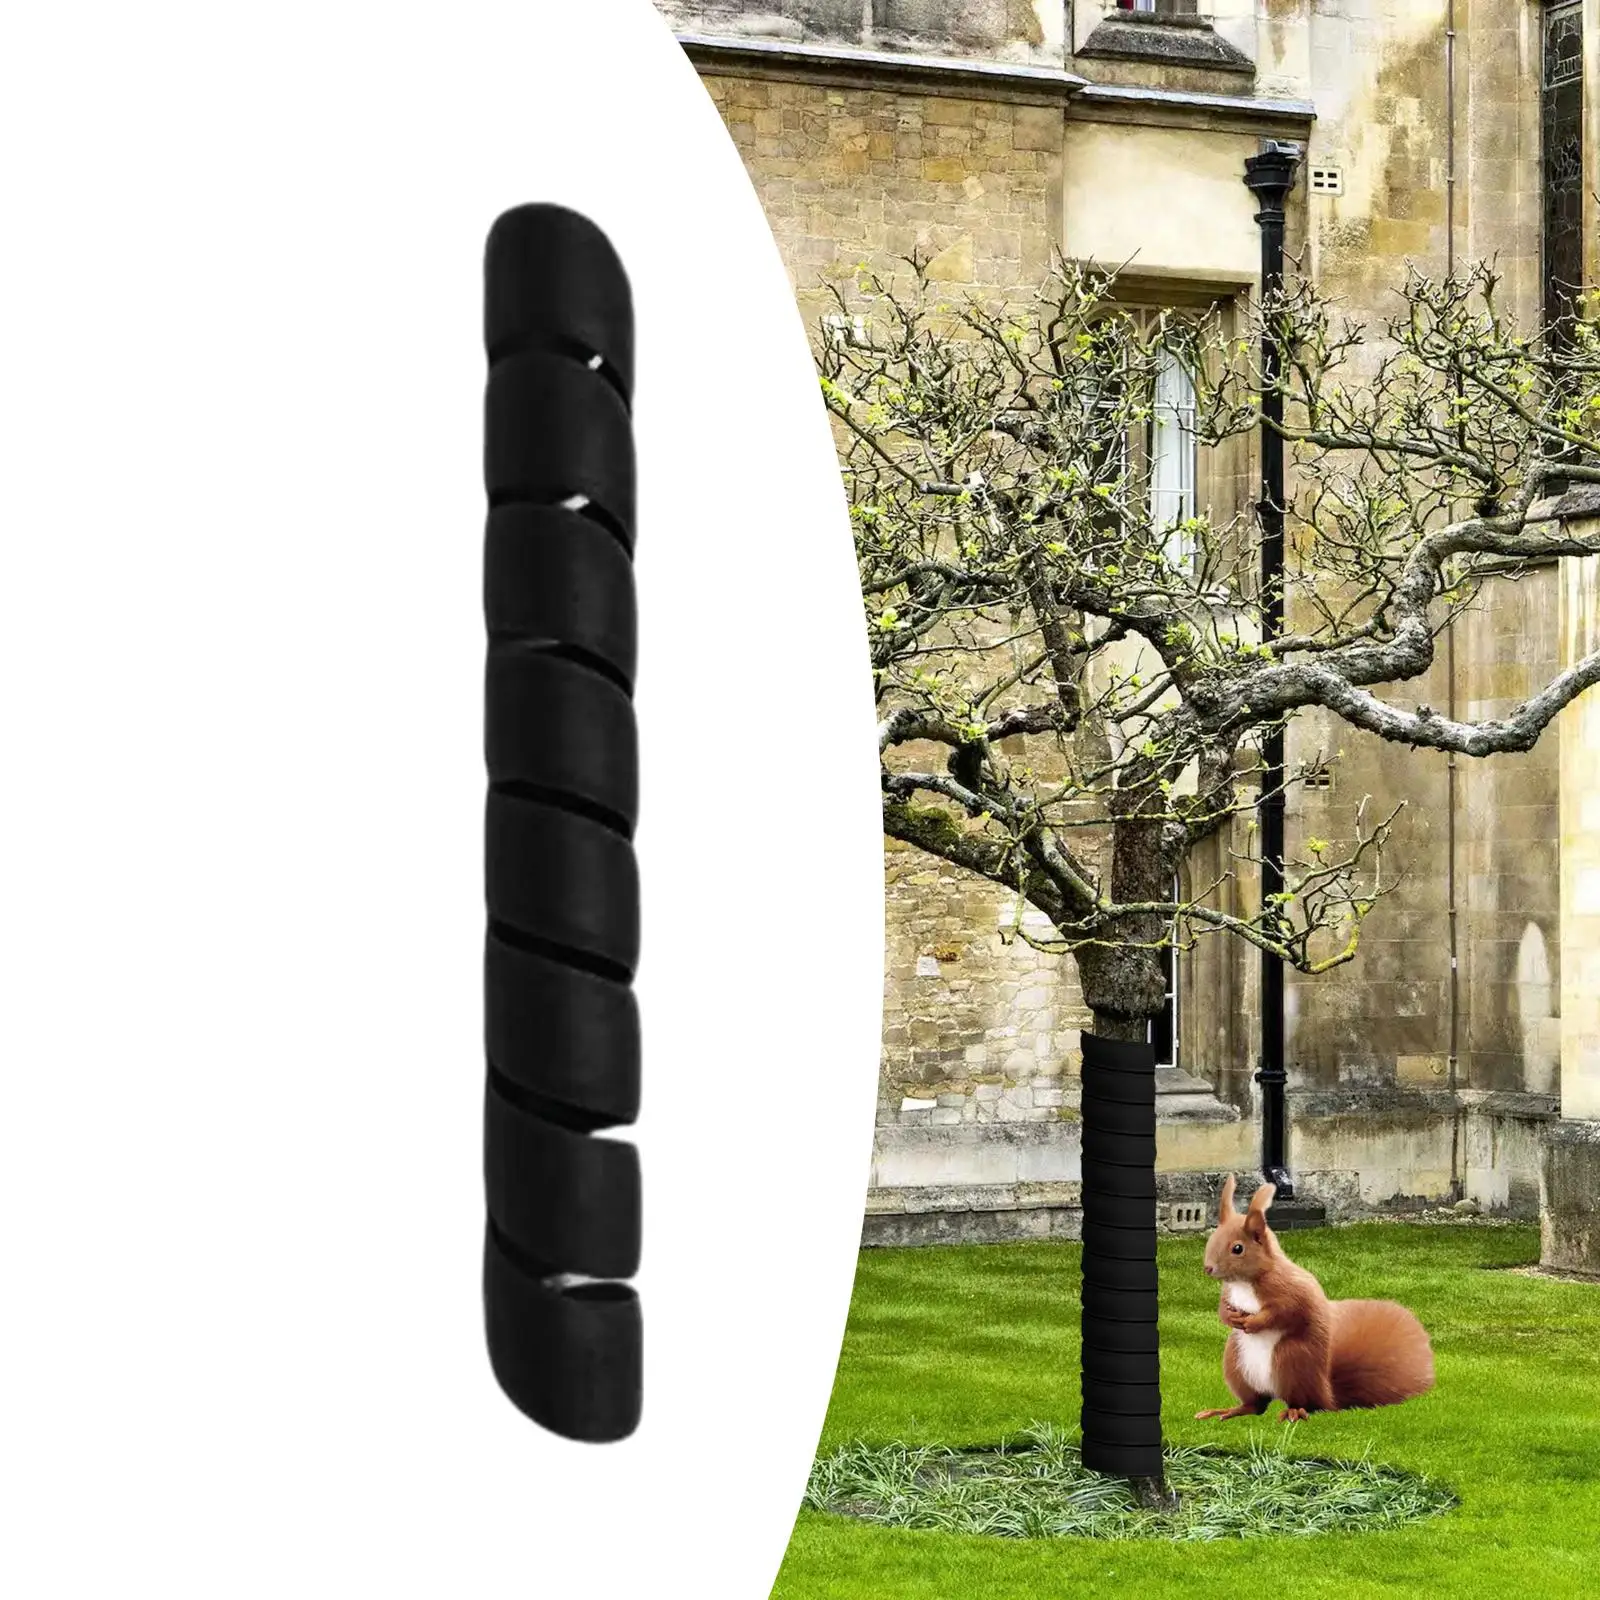 2x Black Tree Trunk Protectors Sapling Protector Durable Scratch Resistant Plants Guard Protective Weather Resistant Tree Wraps